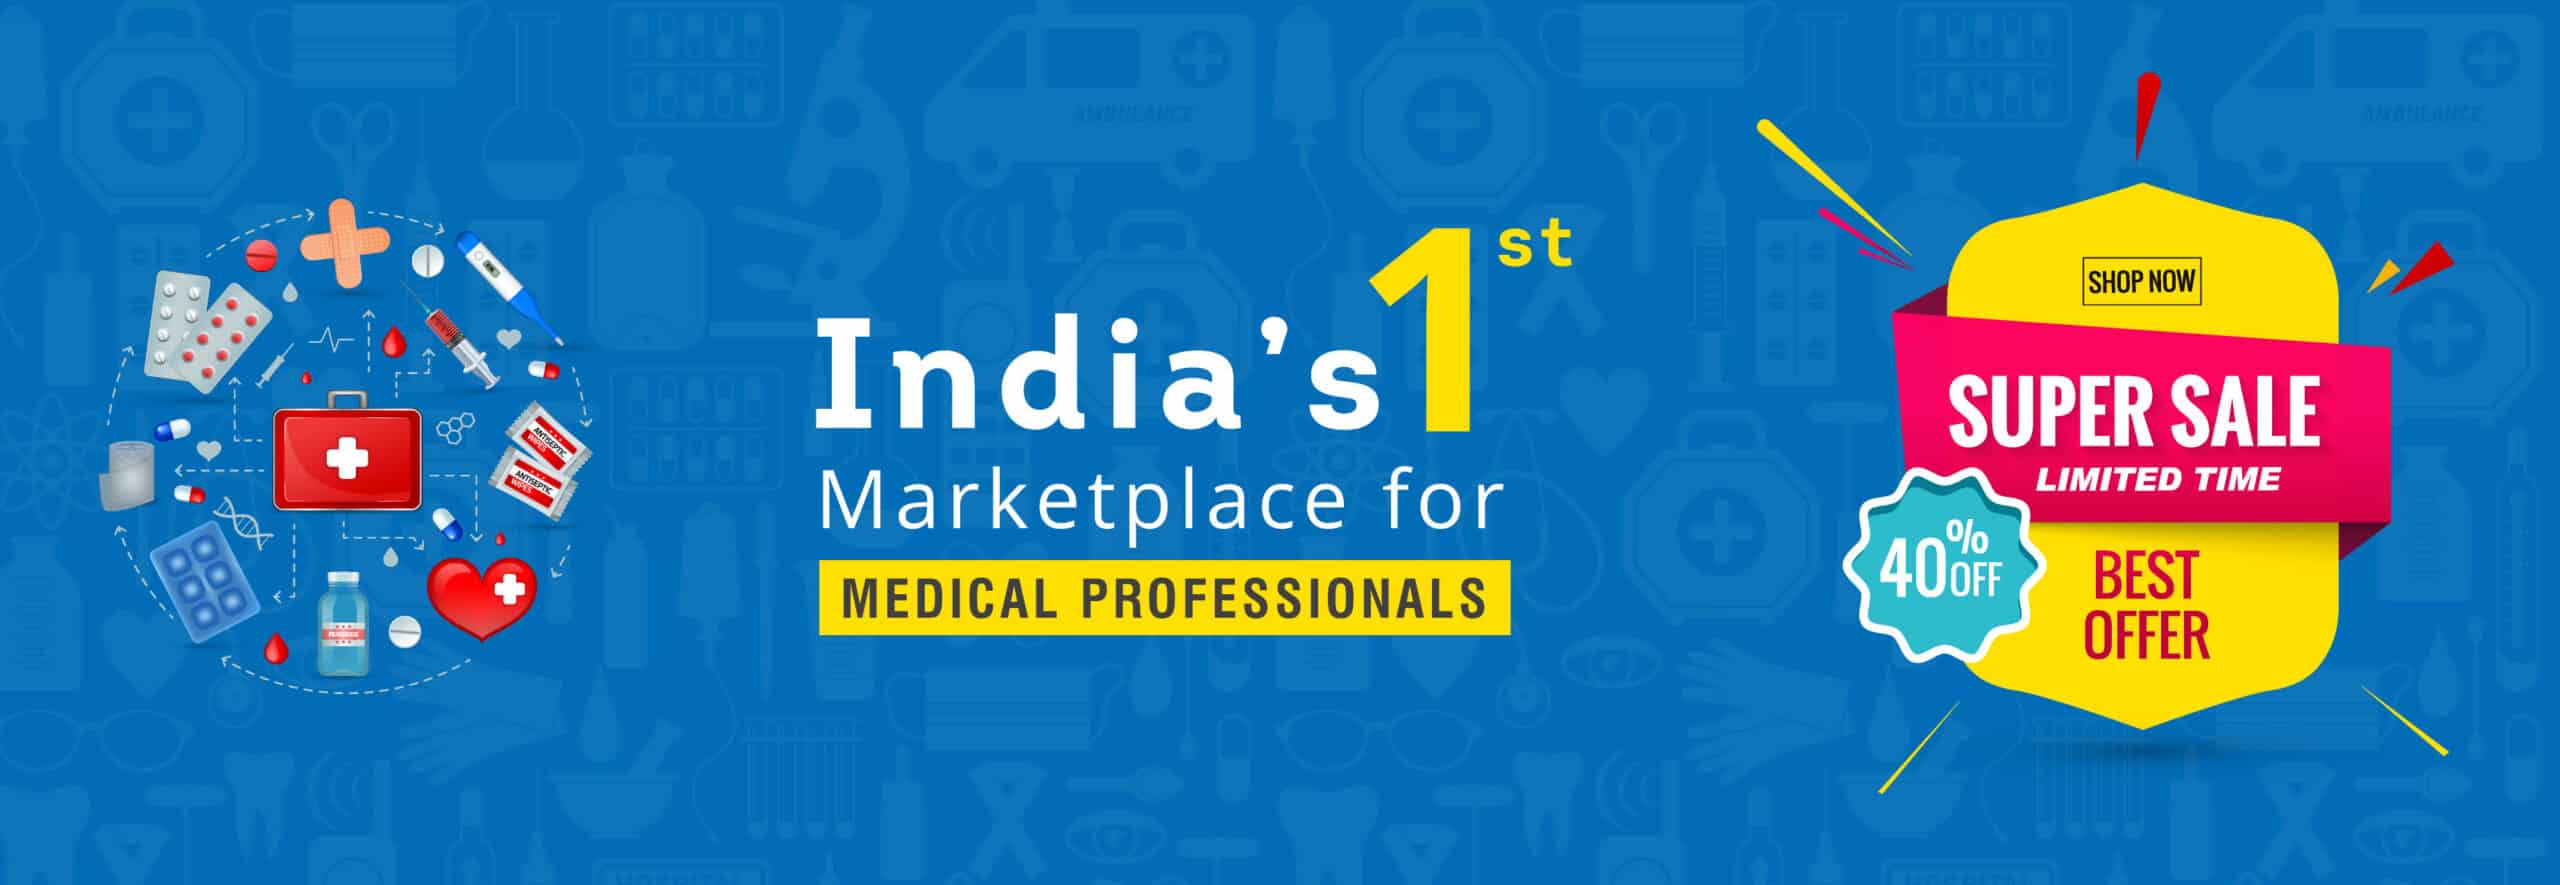 India's 1st Marketplace for Medical Professionals